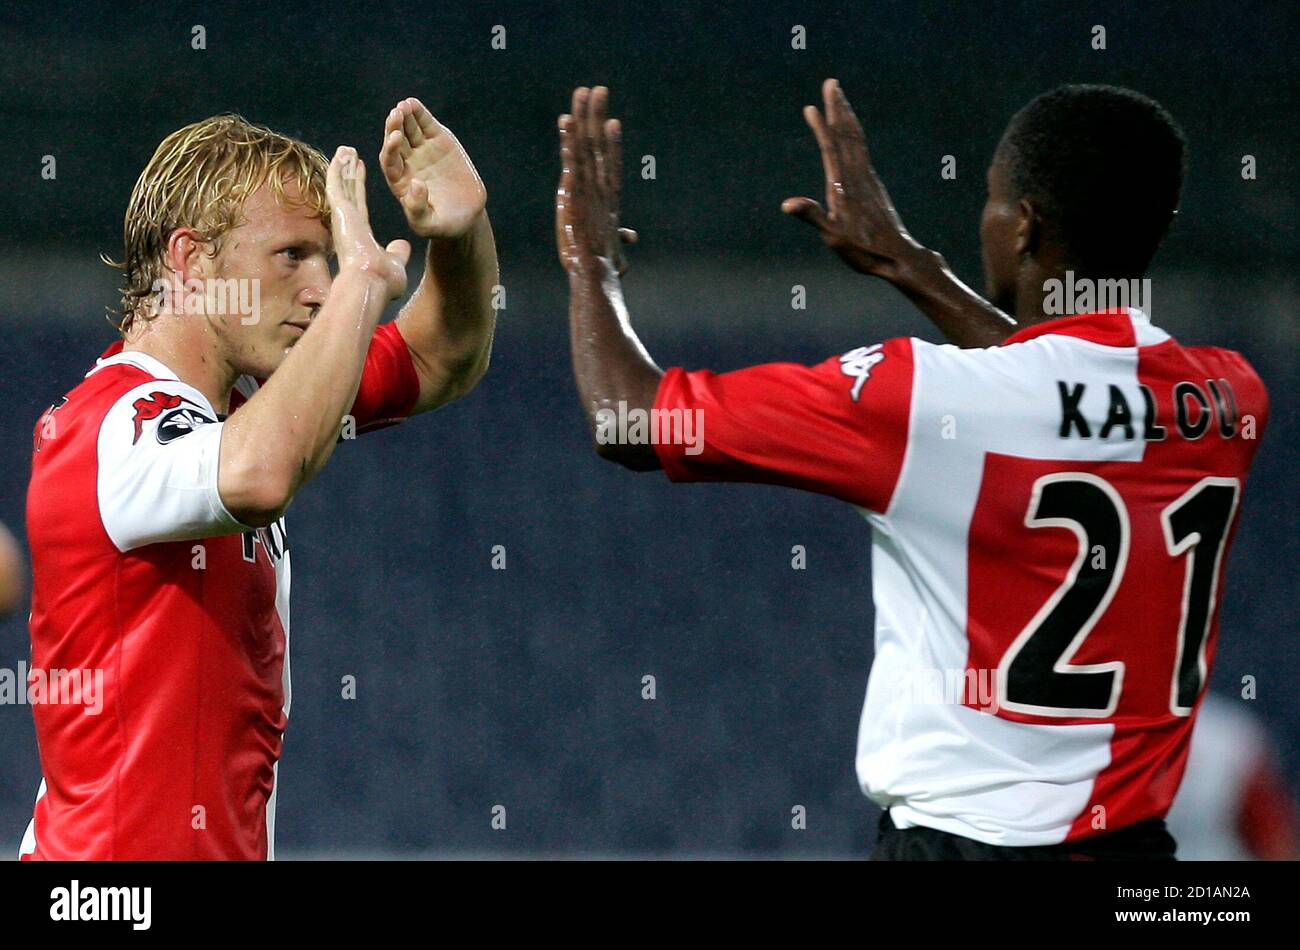 Feyenoord's Kuyt ( ) celebrates with team mate Kalou after scoring against  Rapid Bucharest during UEFA Cup match in Rotterdam. Feyenoord's Dirk Kuyt (  L ) celebrates with team mate Salomon Kalou